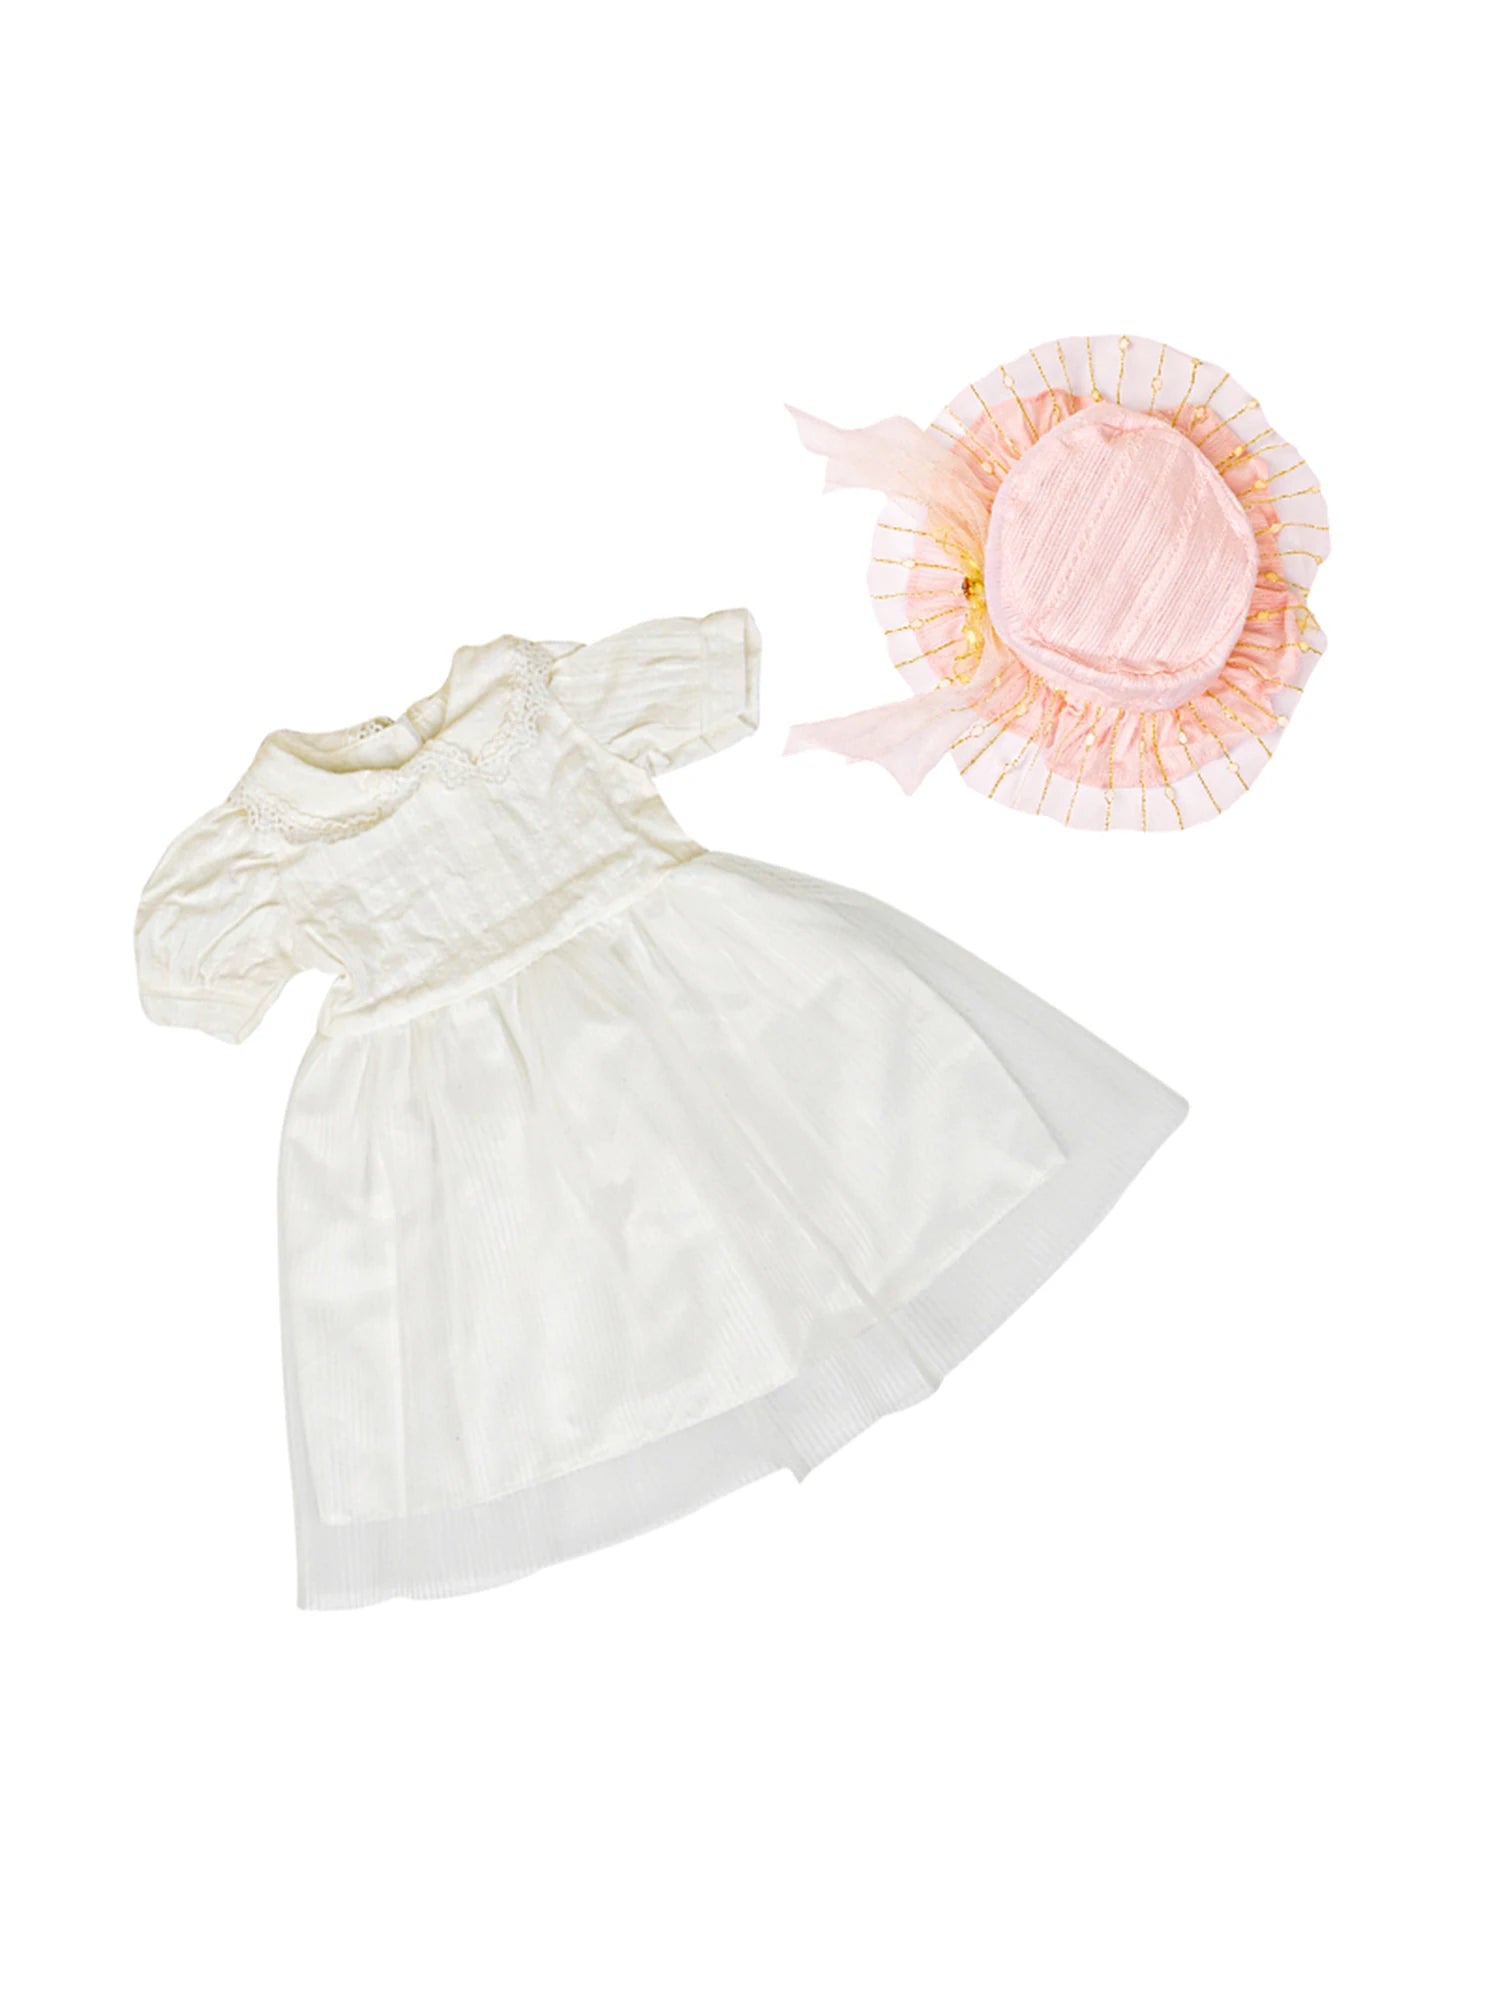 White Country-style Doll Clothing